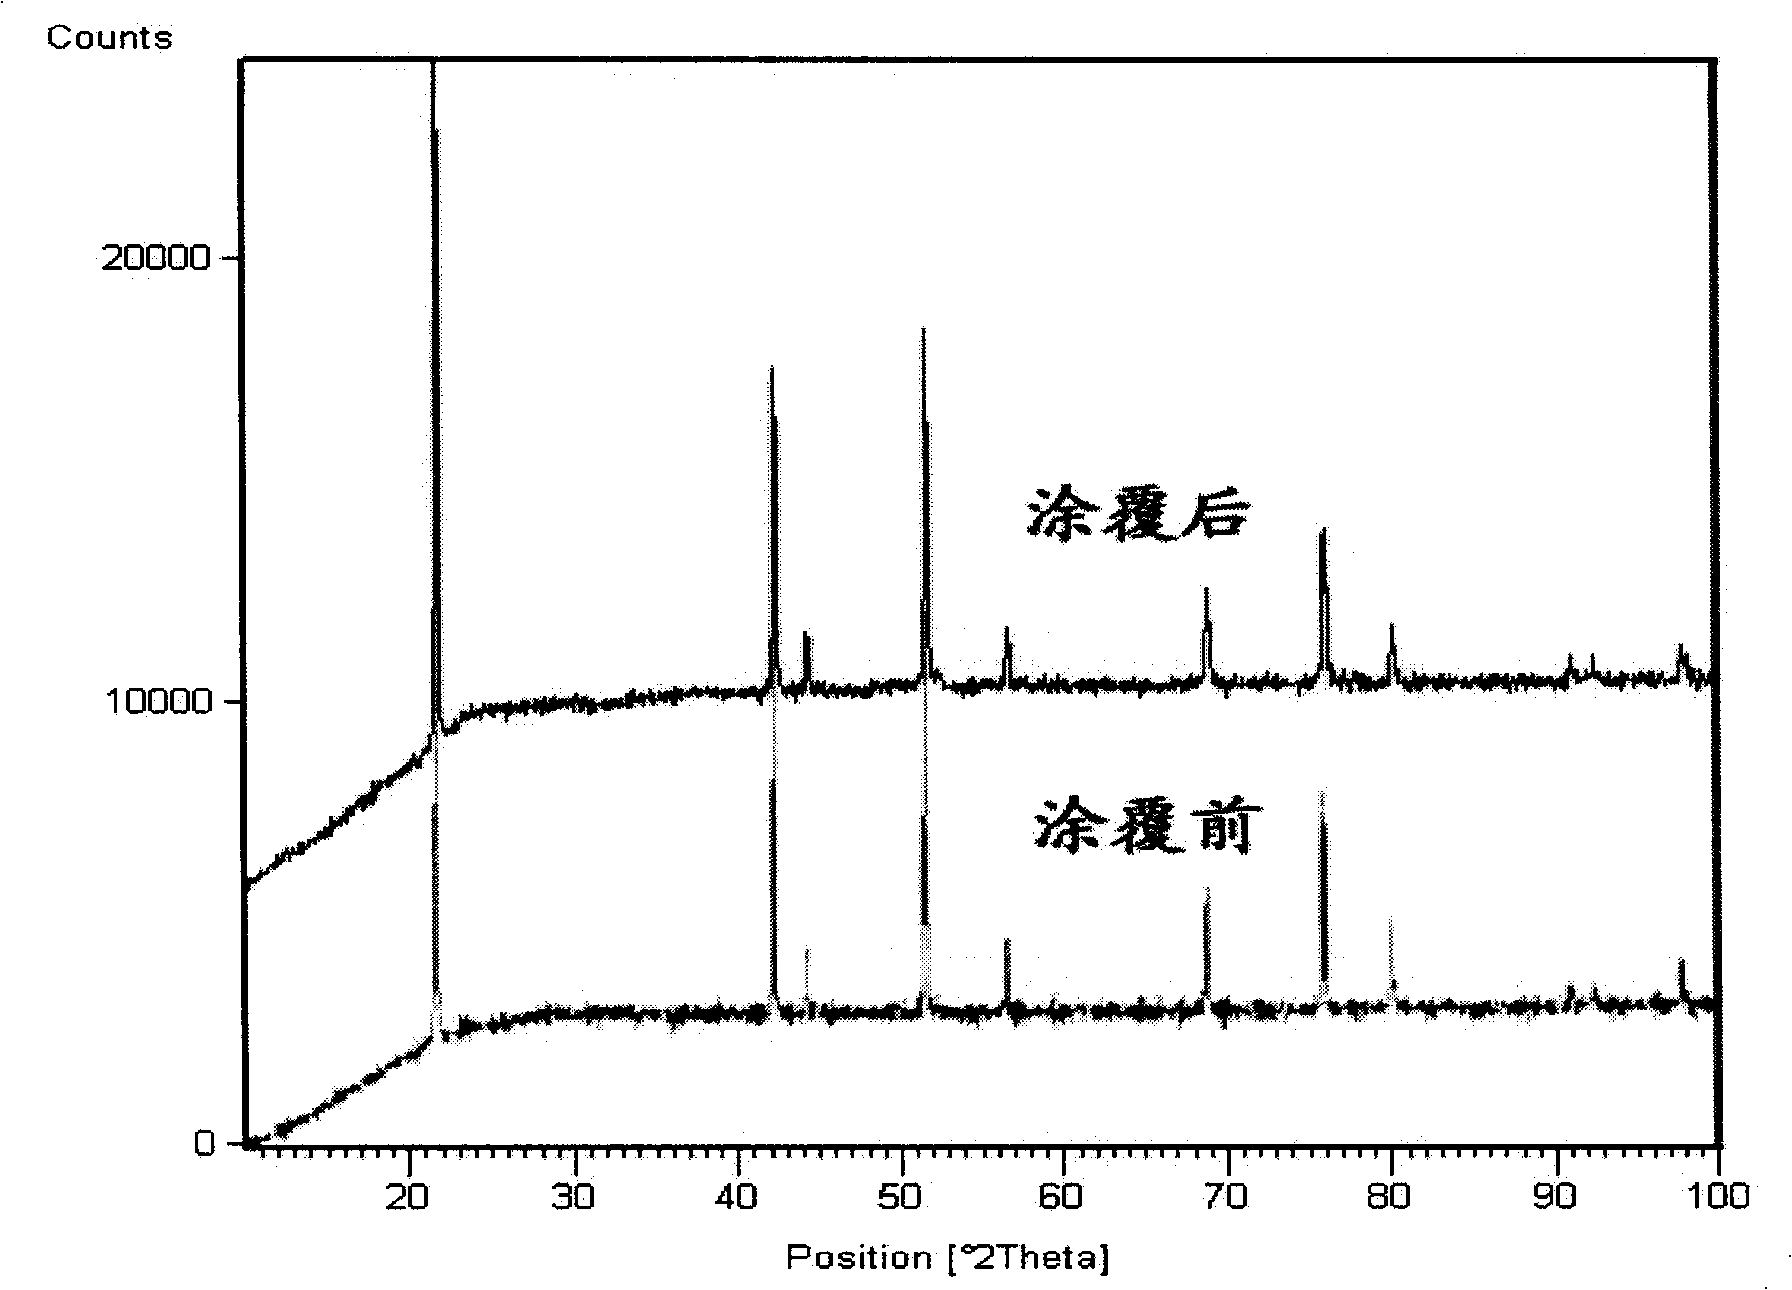 Complex Li-Mn-oxide, manufacture method and battery made of this material